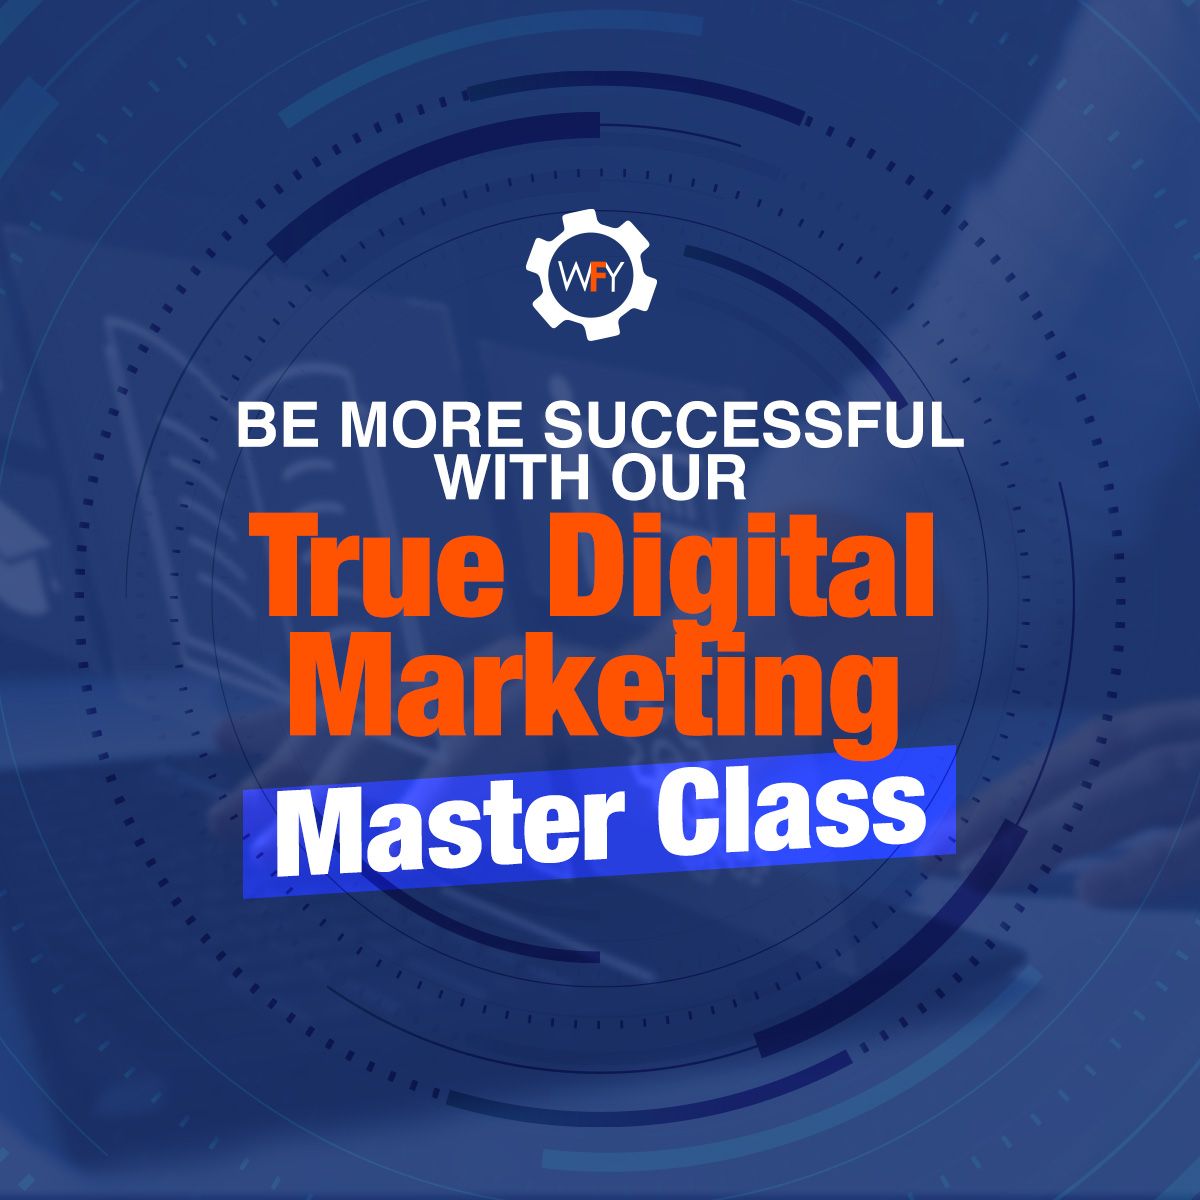 Be more successful with our True Digital Marketing Master Class